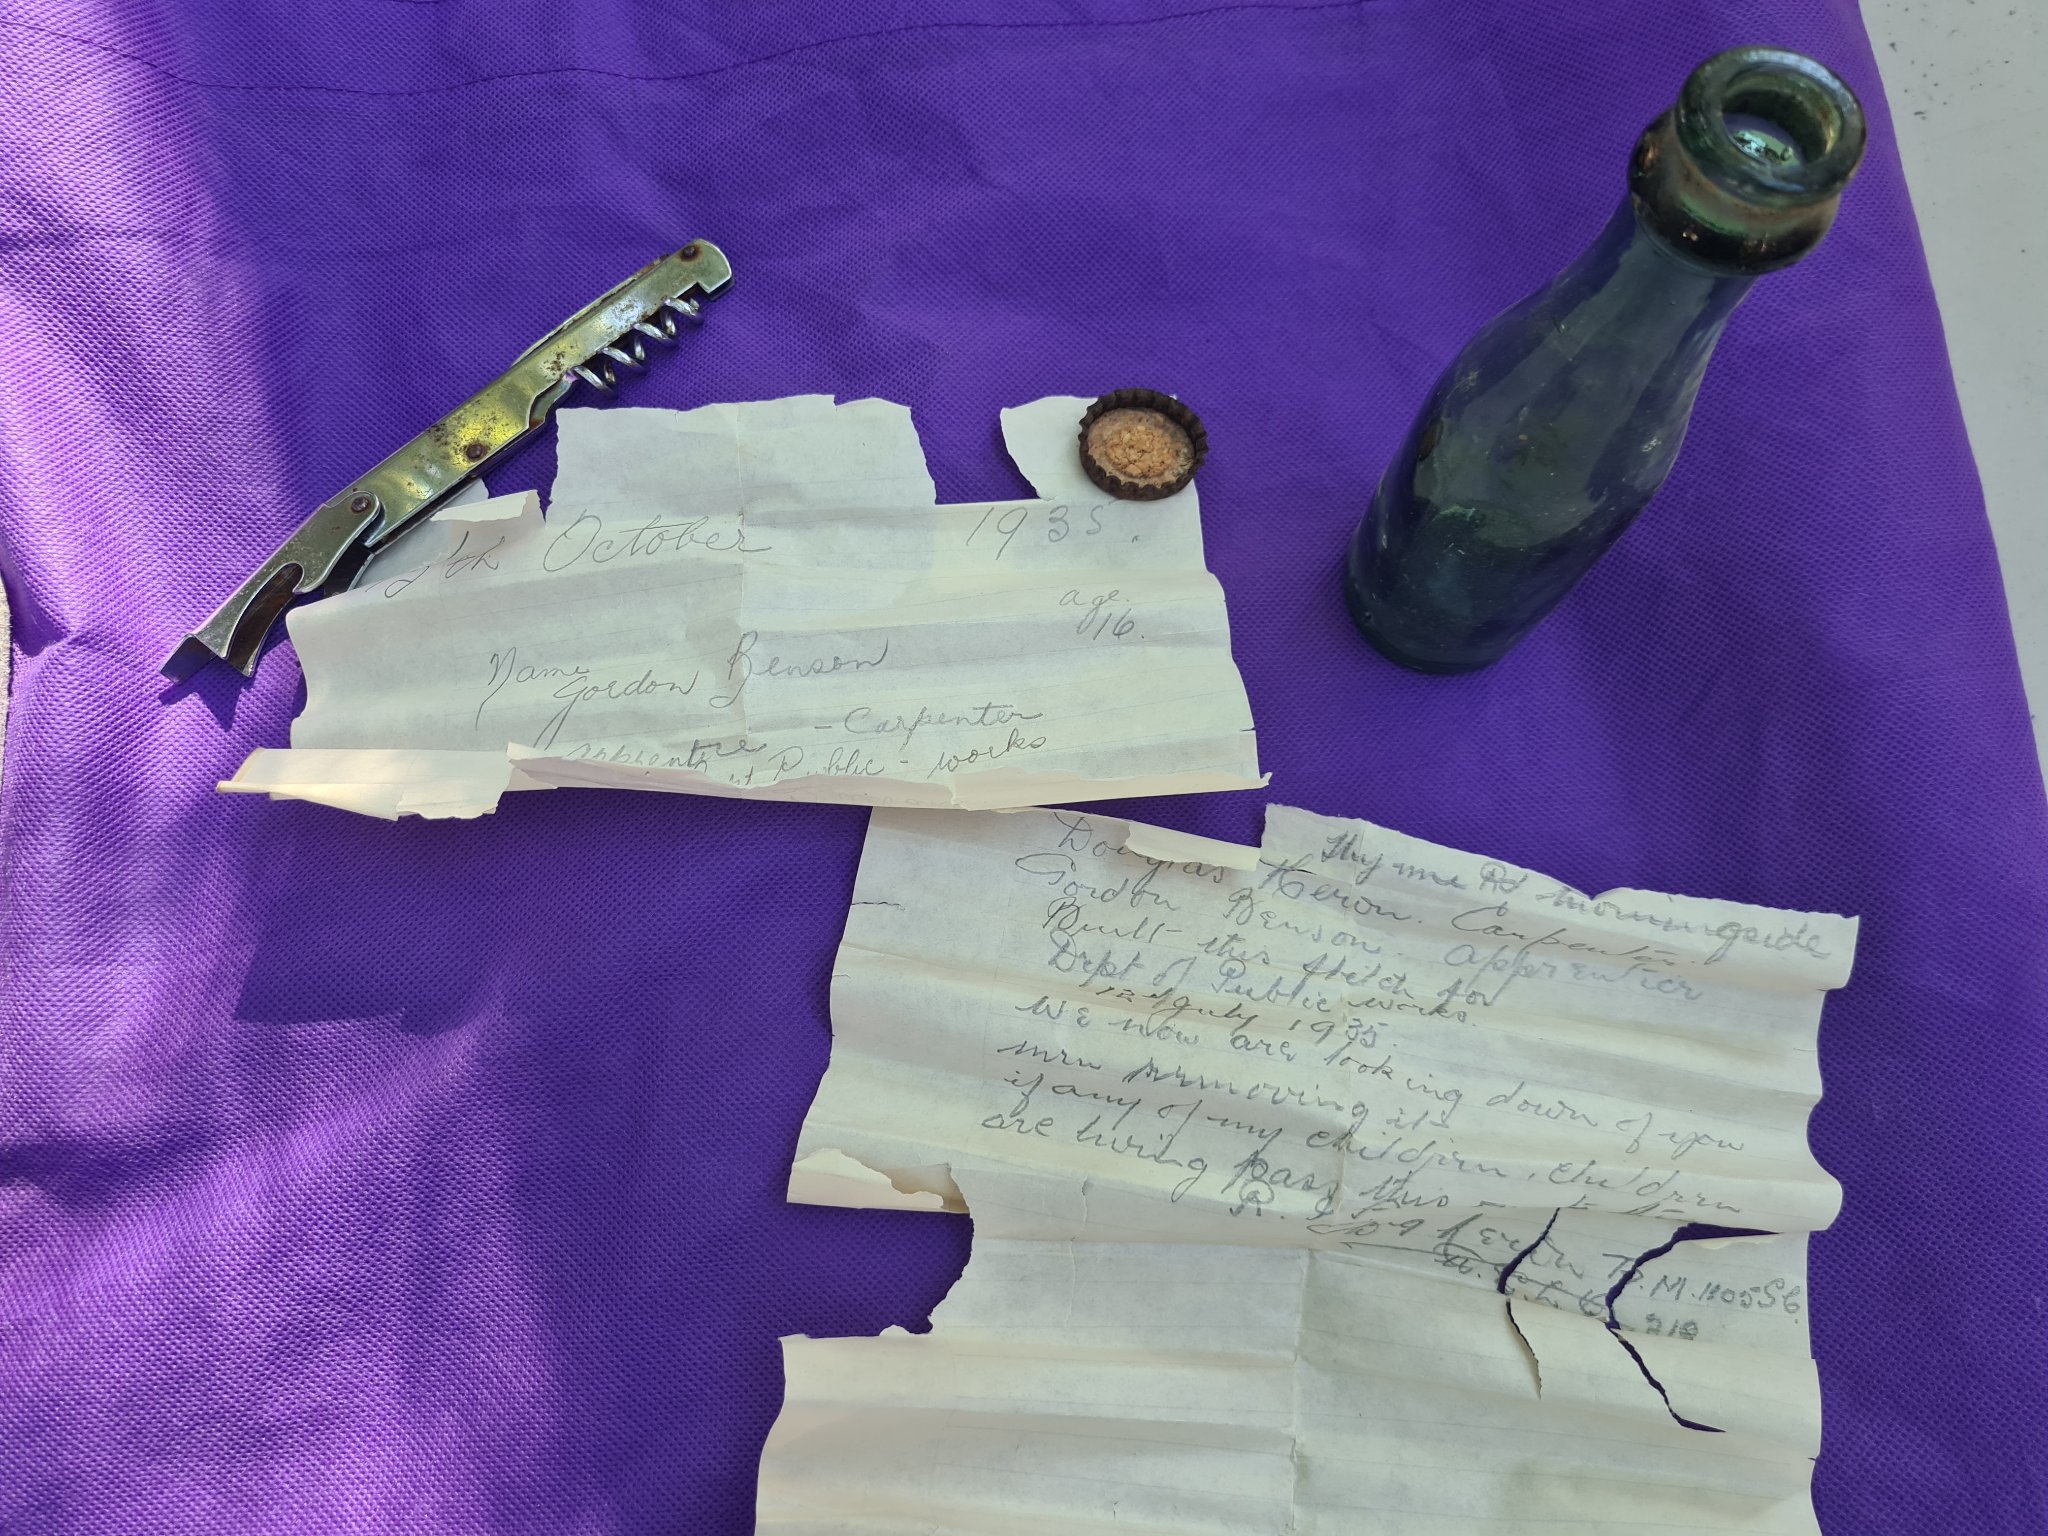 an older letter from 1935, written by gordon benson. the letters are laying on a purple table cloth next to the old, green bottle it was in and the bottle's cap.